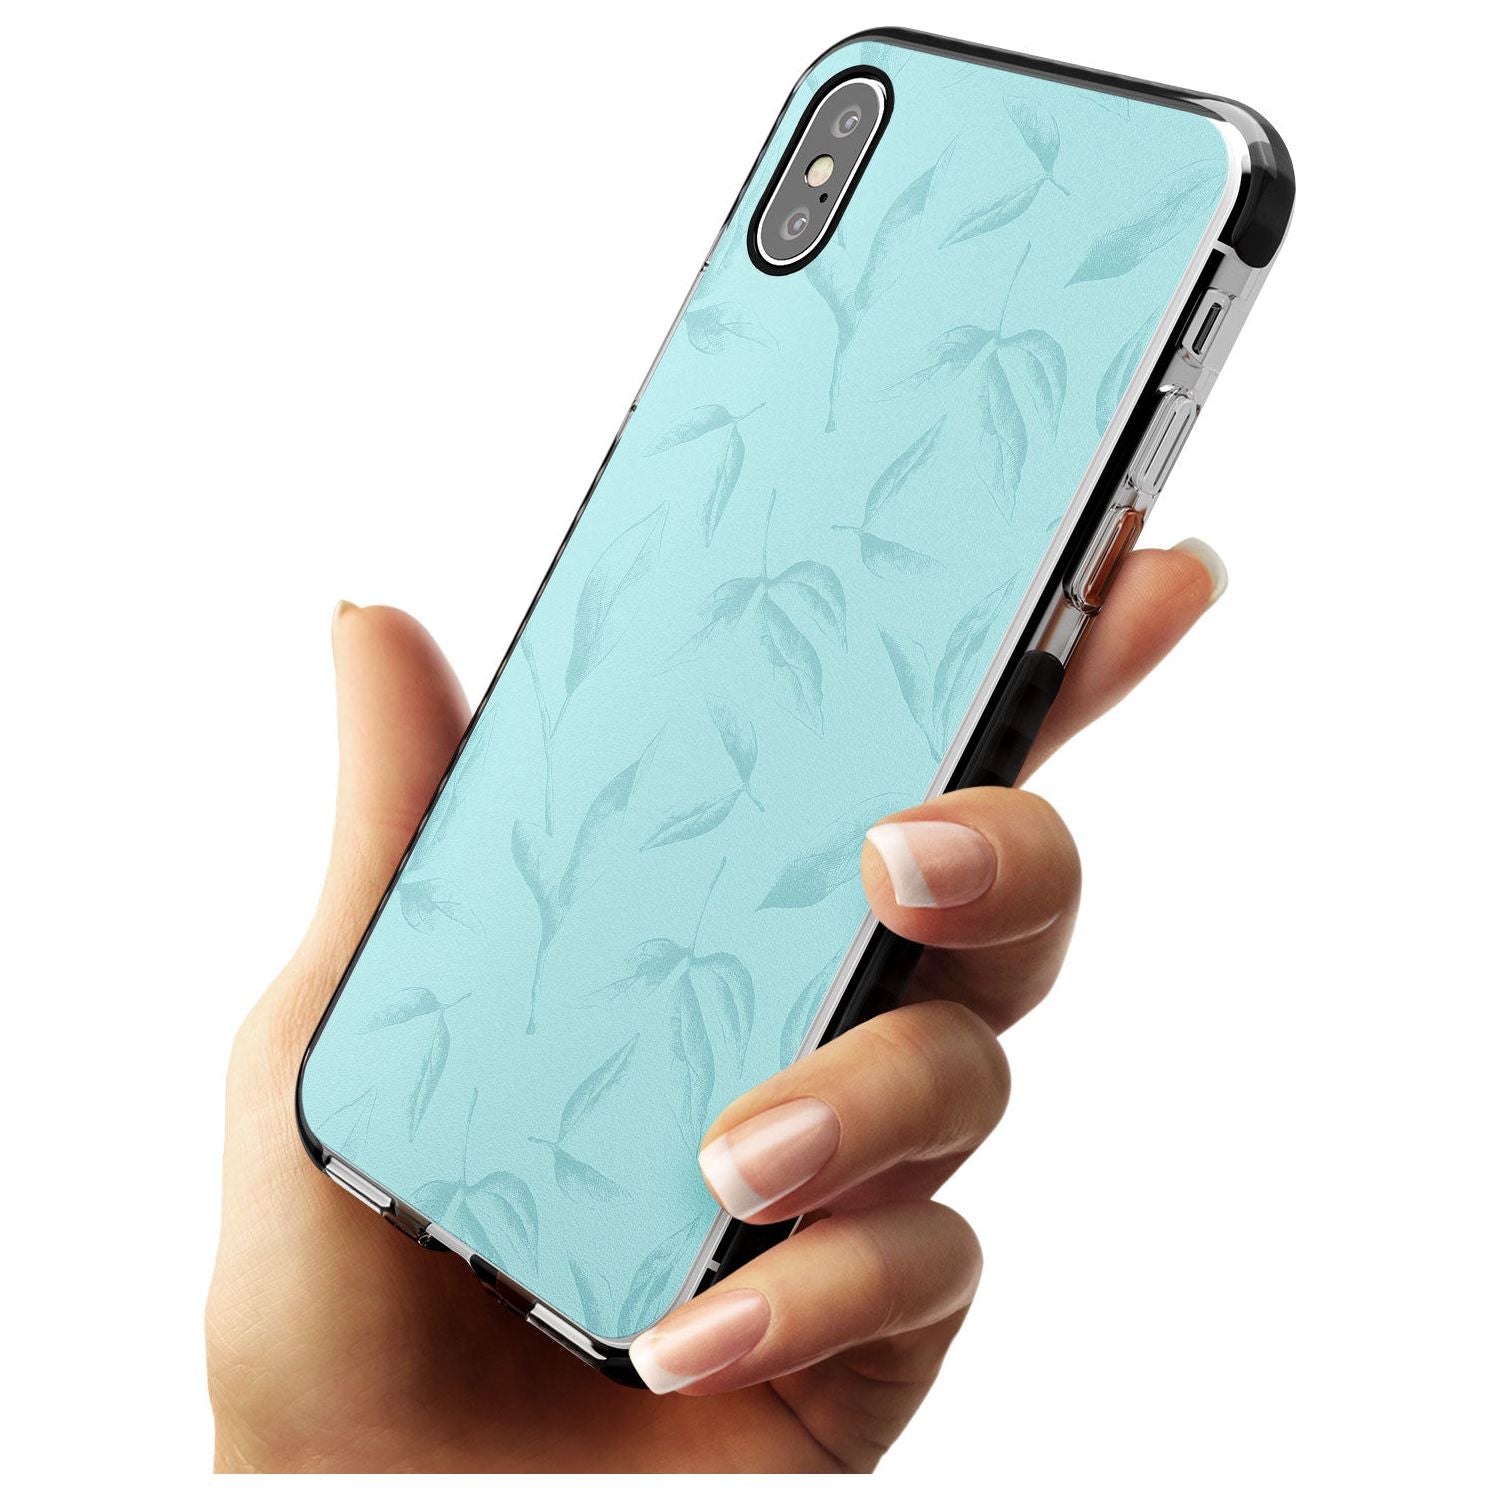 Blue Leaves Vintage Botanical Black Impact Phone Case for iPhone X XS Max XR